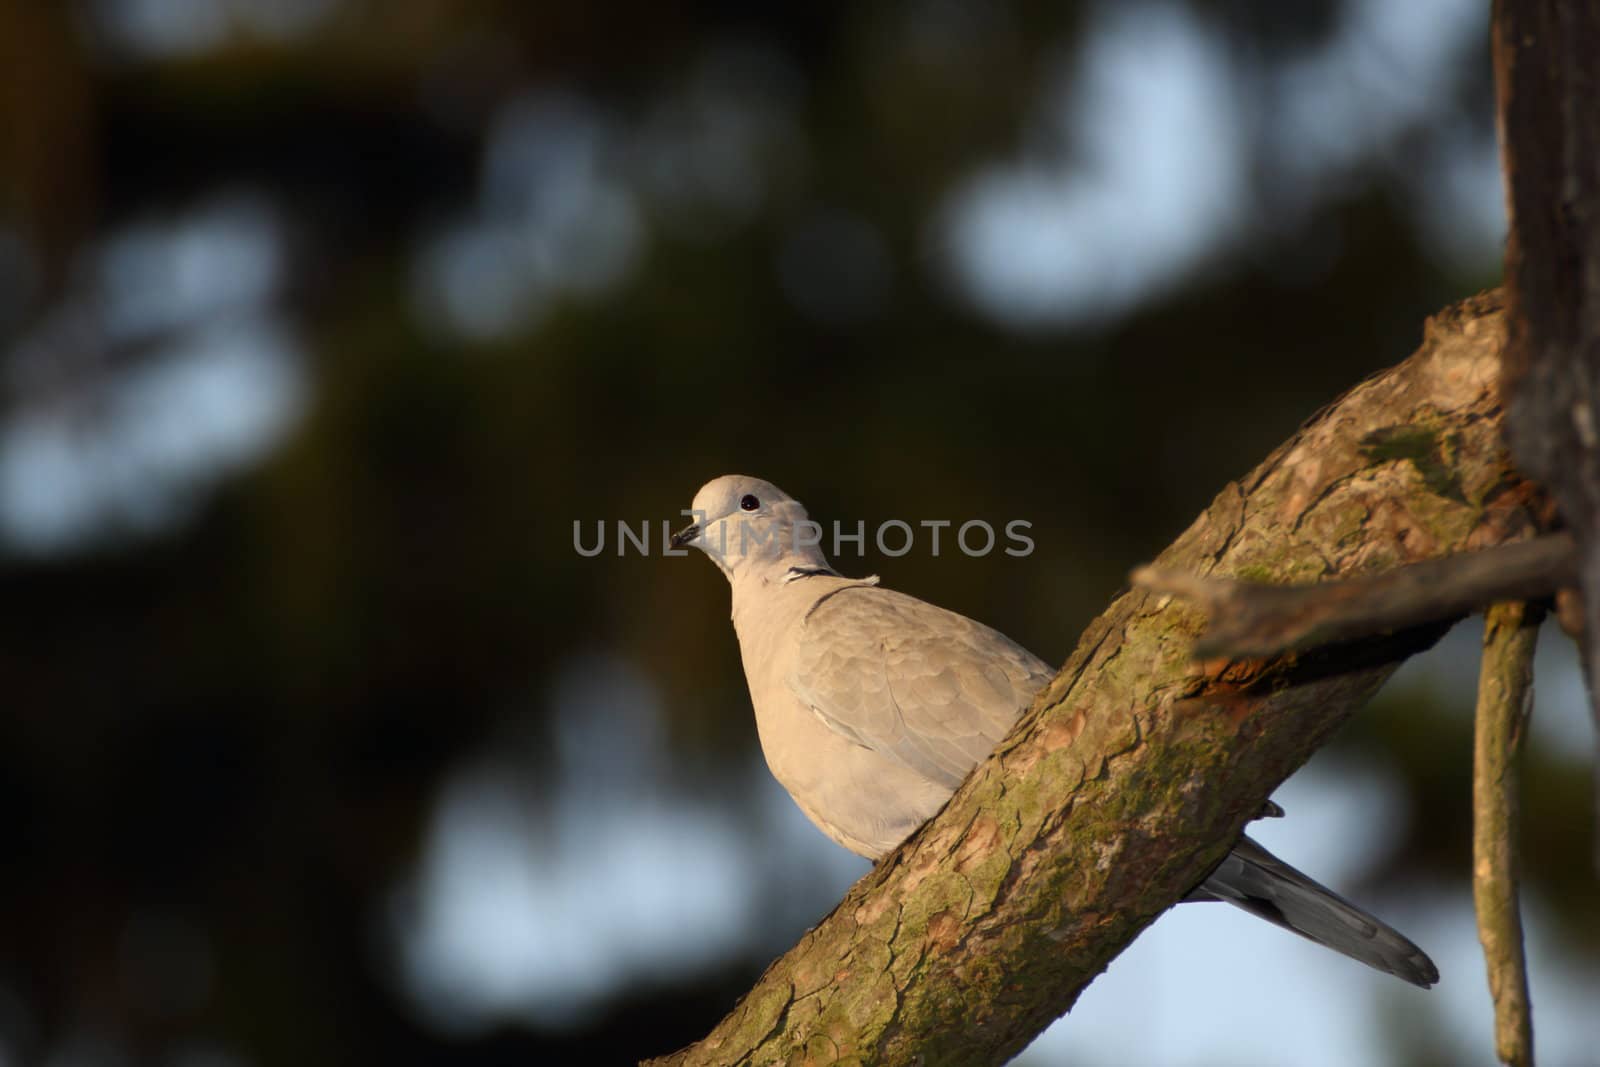 turtledove standing on a branch illuminated by the warm light of sunset